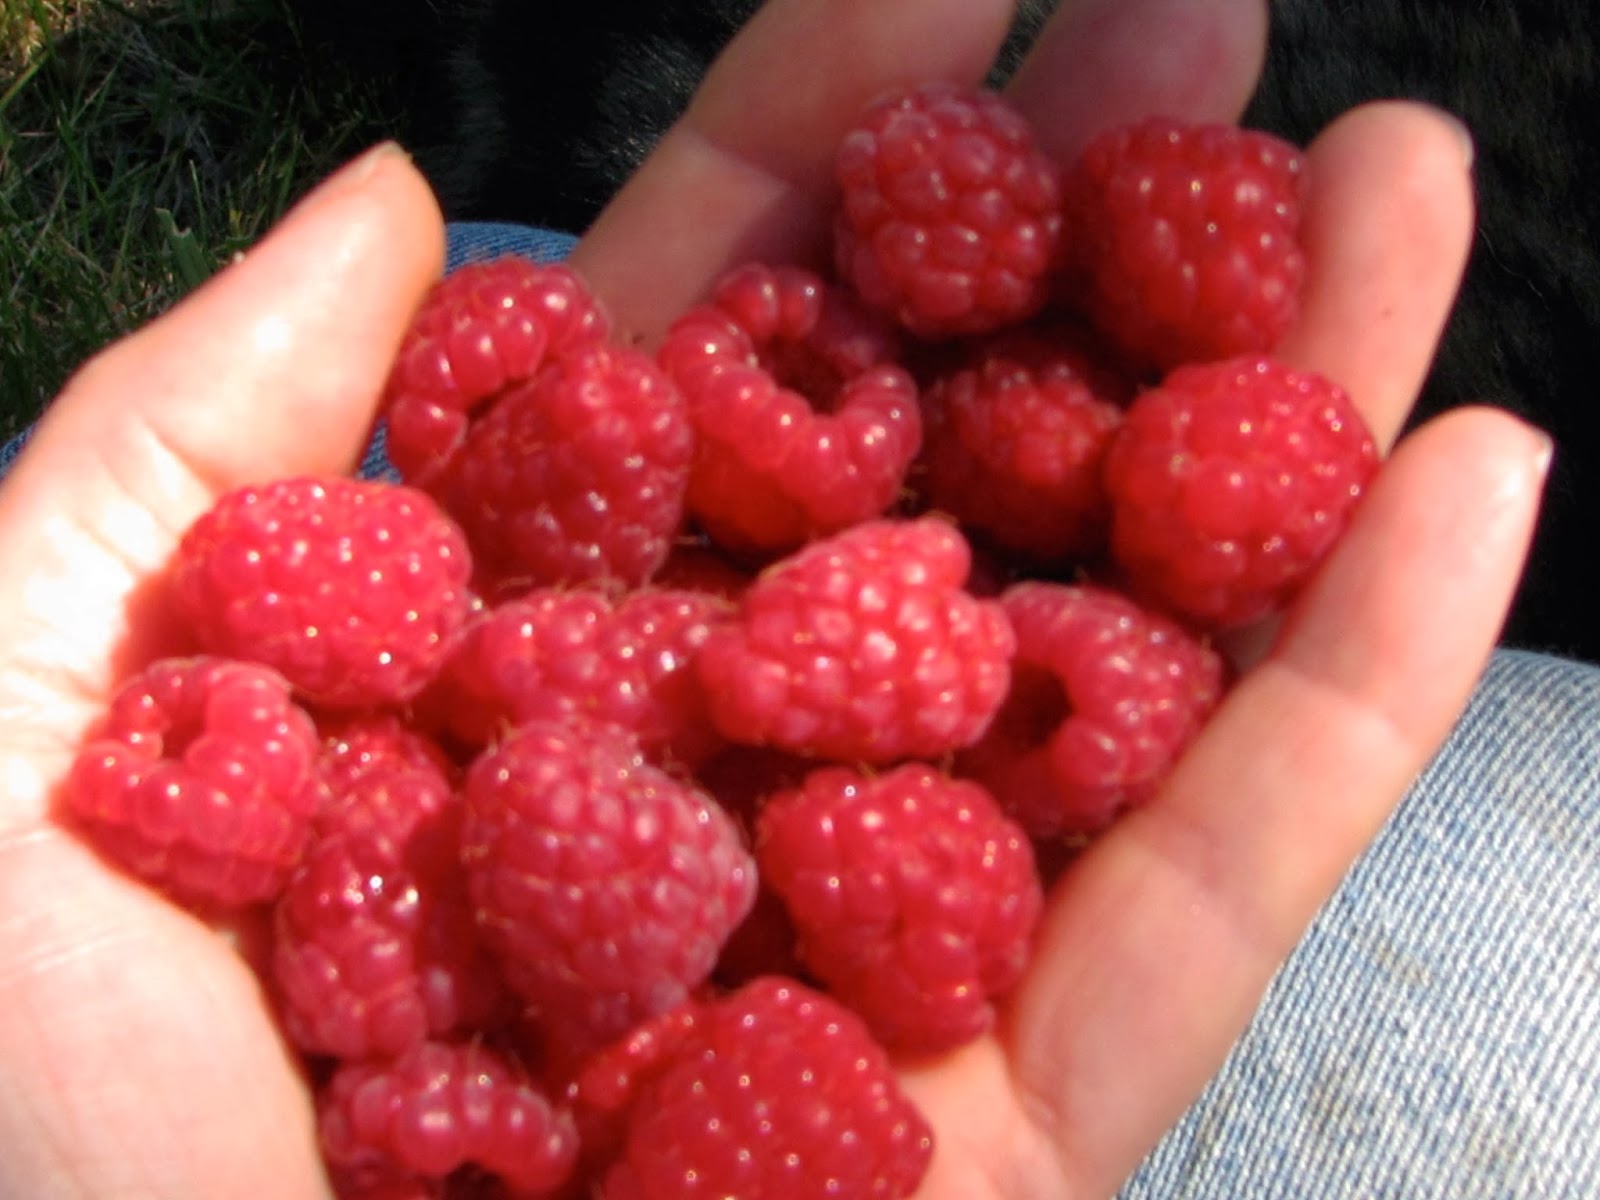 The Reluctant Homesteaders: Propagating Some Berries